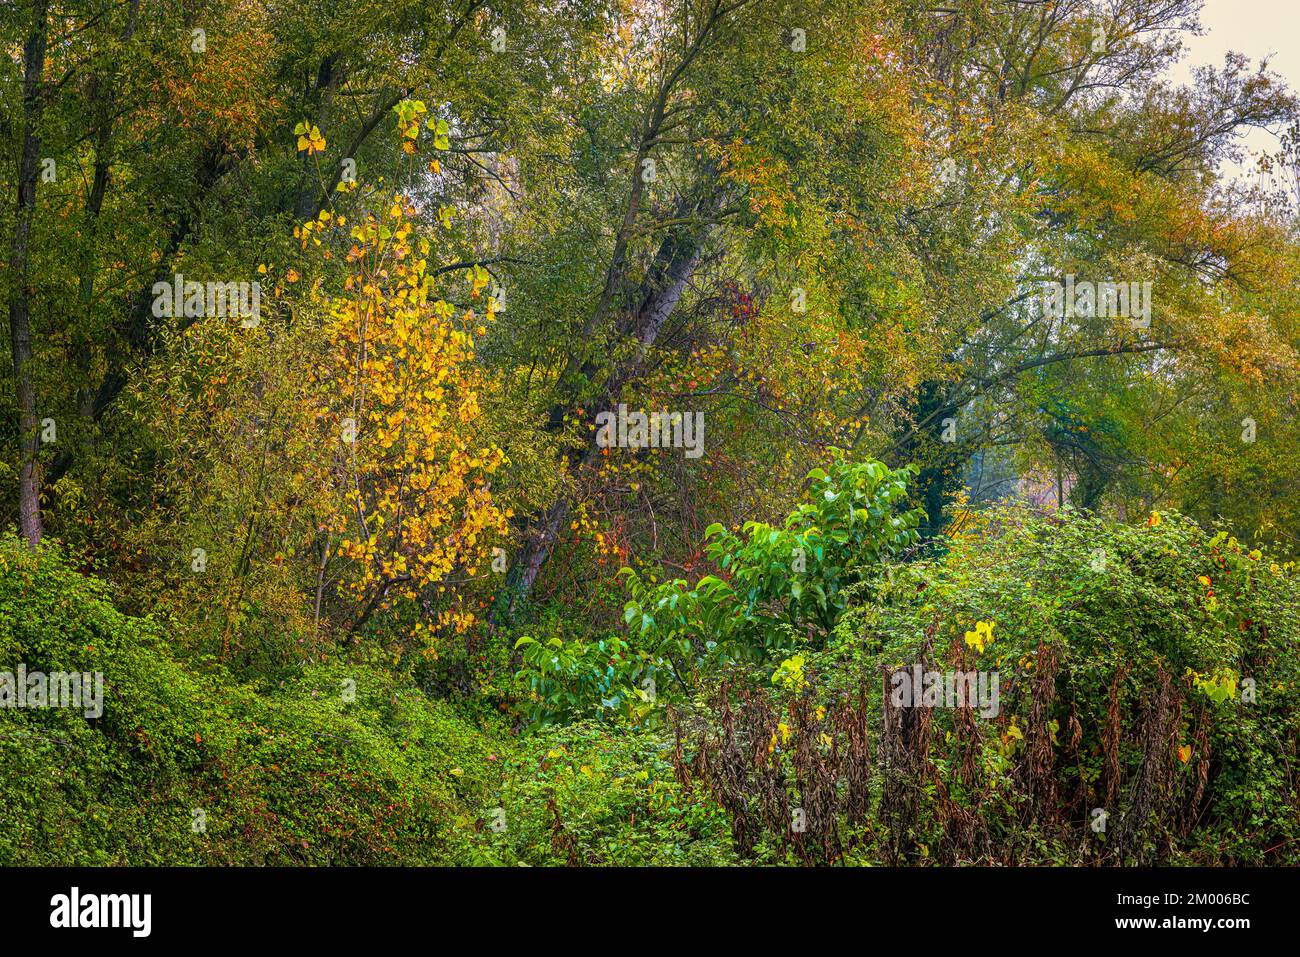 Abruzzo, forest with plants and shrubs of temperate and mild climates in an autumnal guise. Abruzzo, Italy, Europe Stock Photo